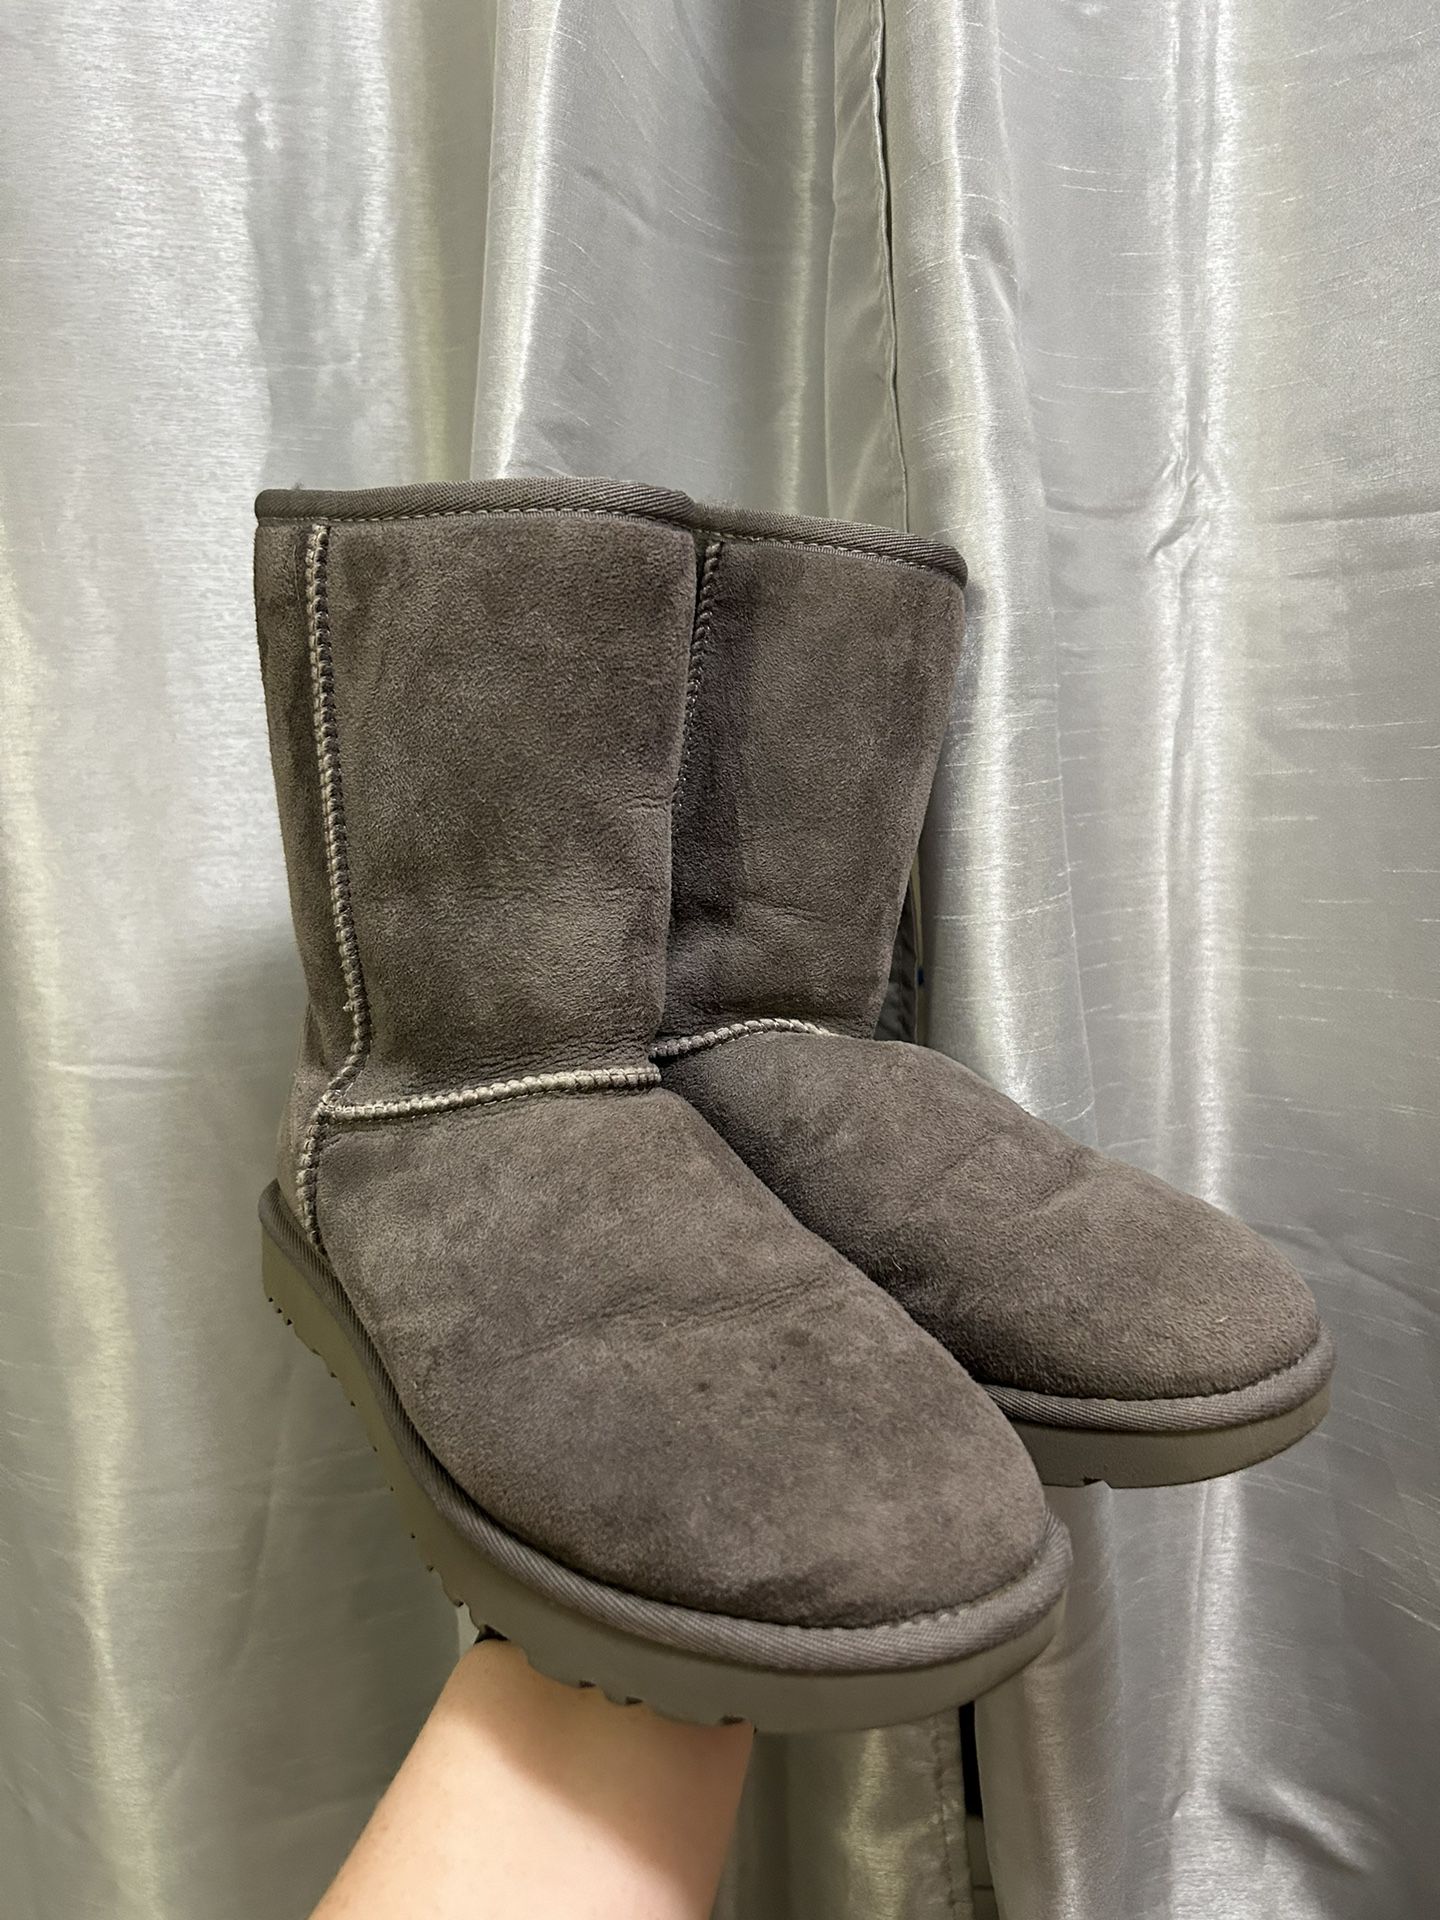 Gray Ugg Boots - Size 8